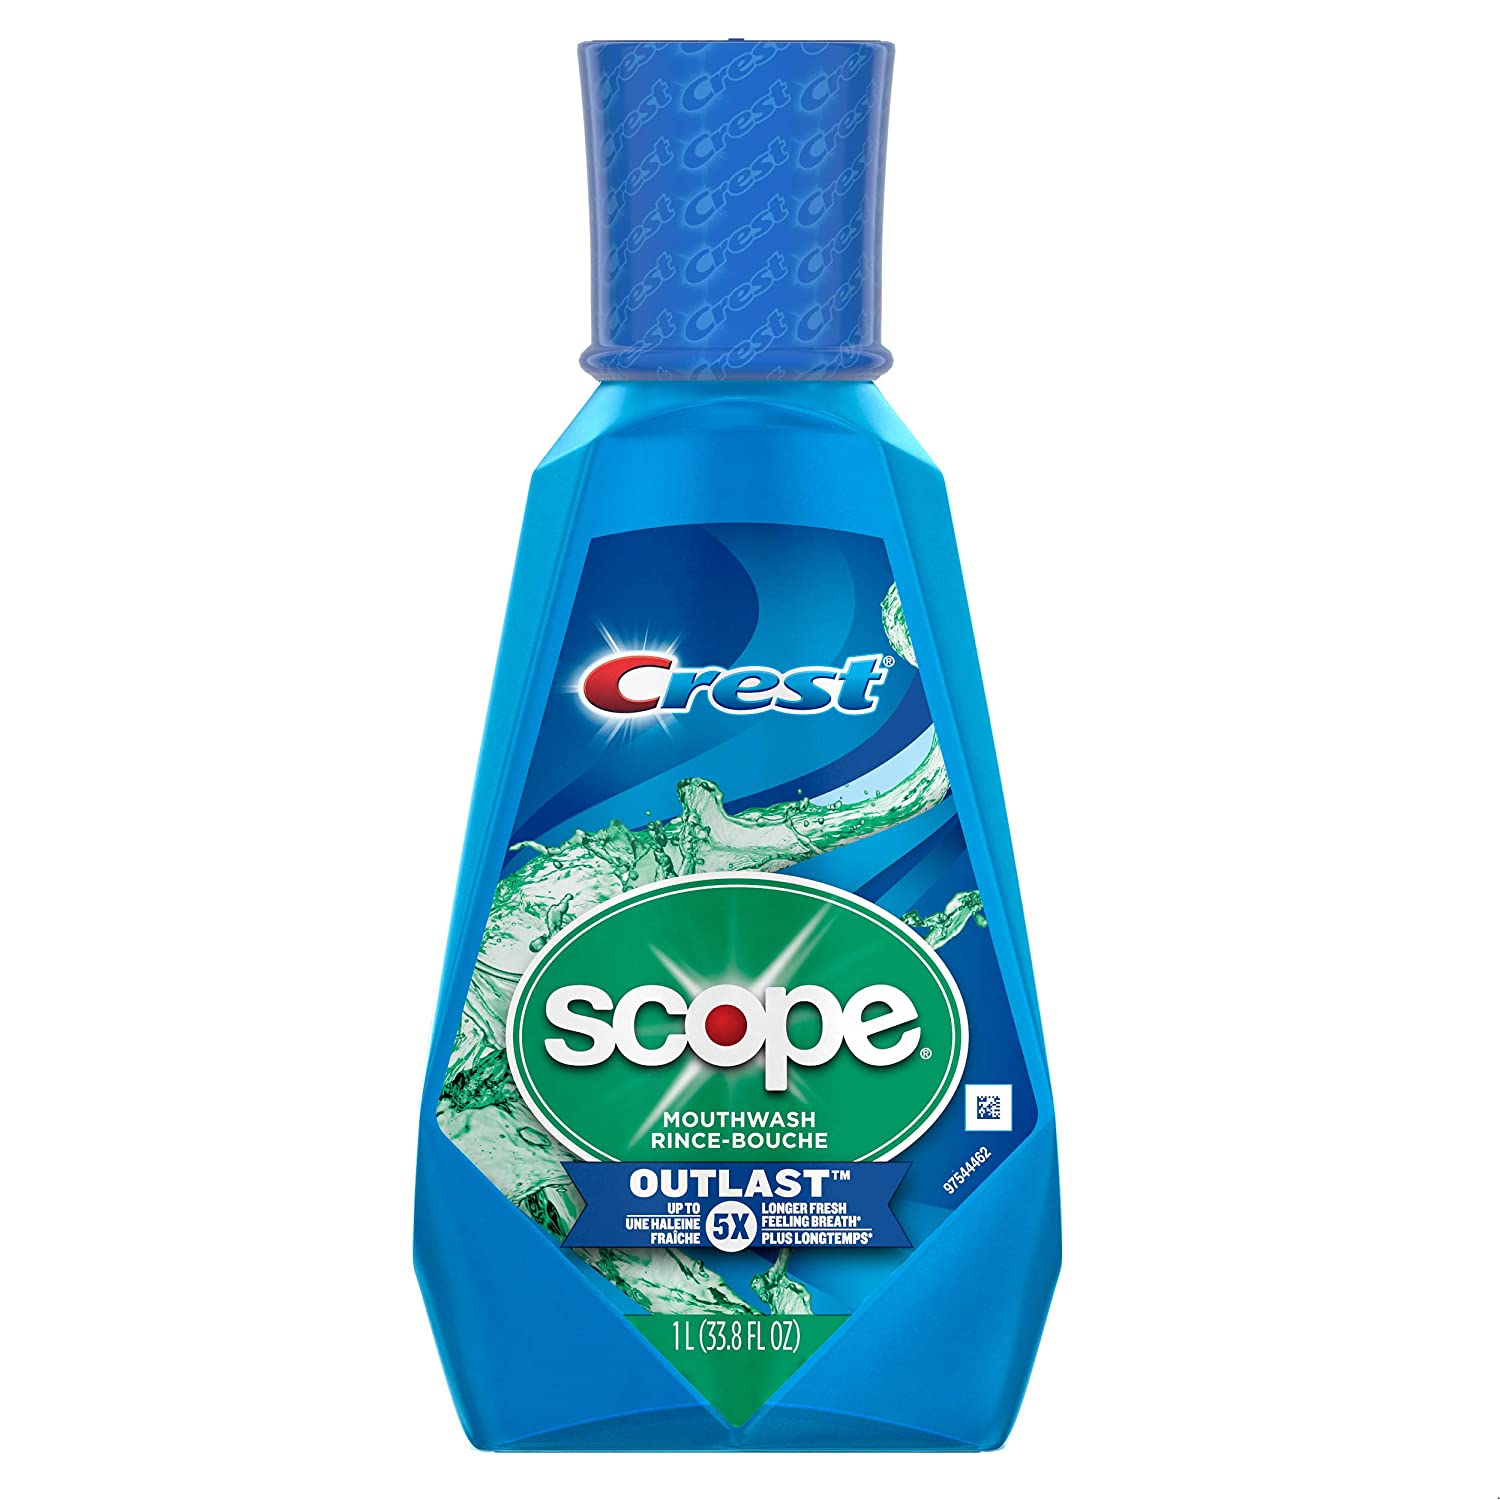 33.8-Oz Crest Scope Outlast Mouthwash (Peppermint) $2.85 w/ S&S + Free Shipping w/ Prime or $25+